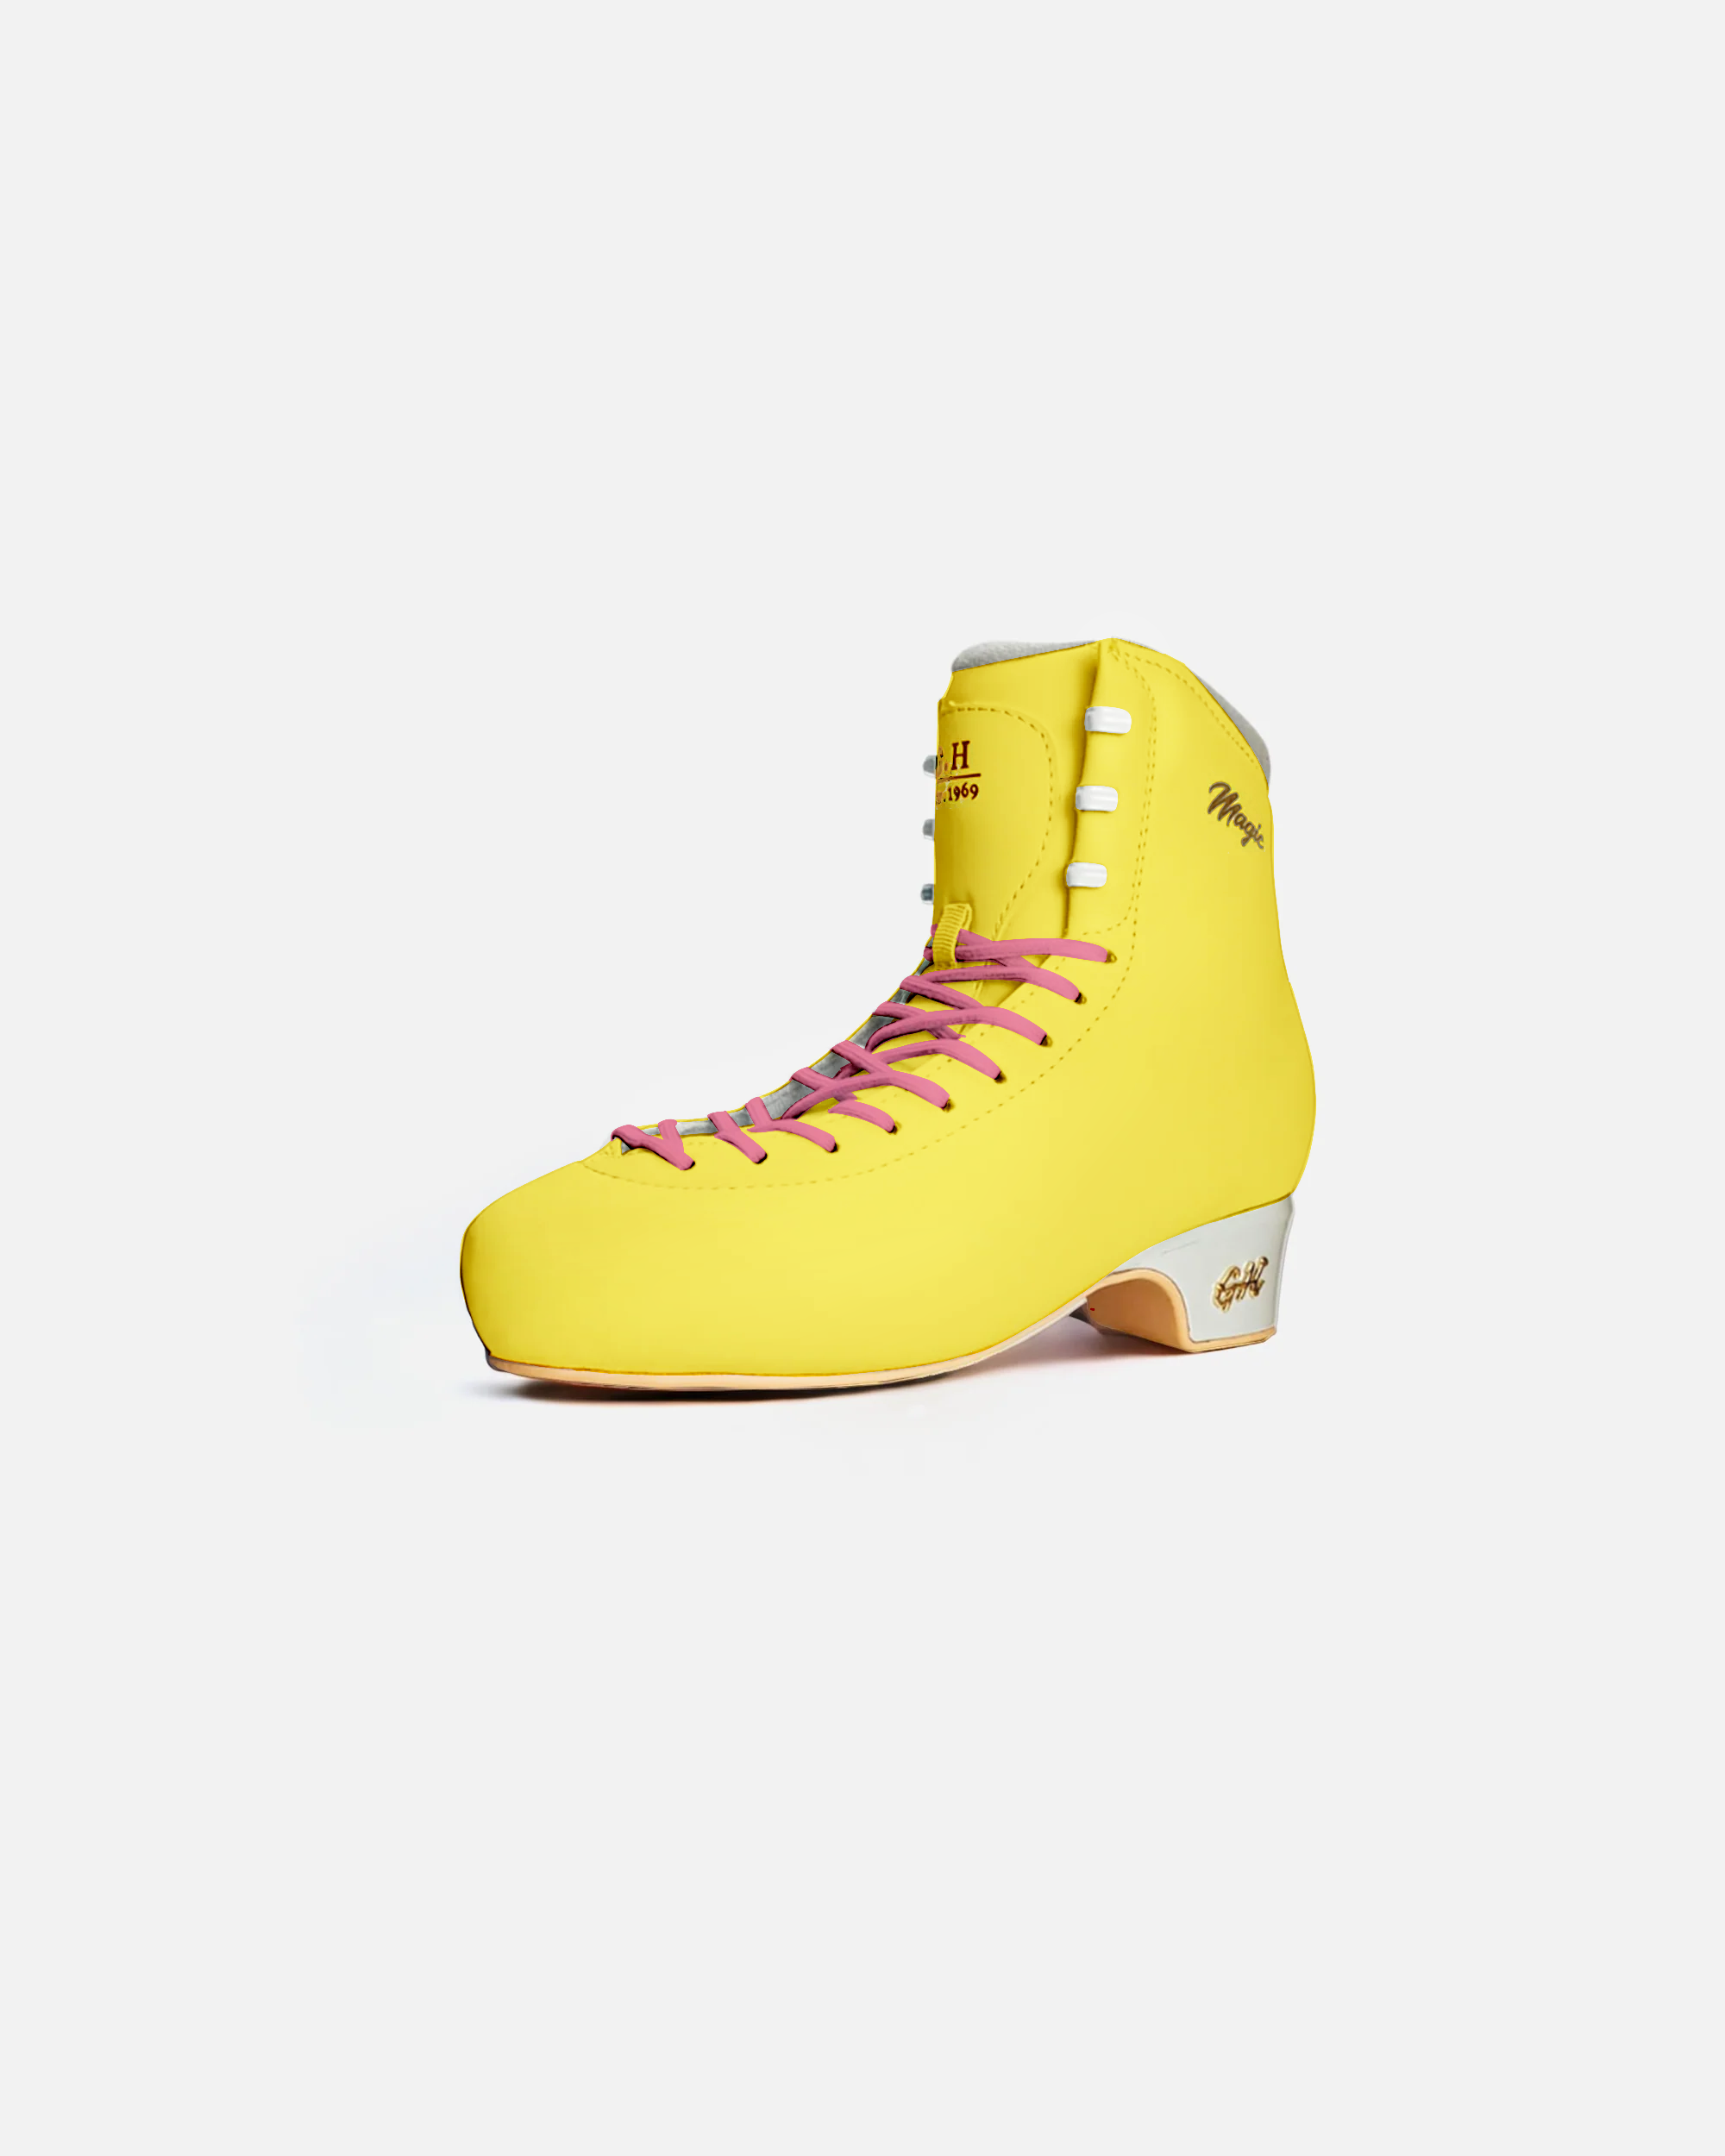 Magic Inline Skates (Boots Only)